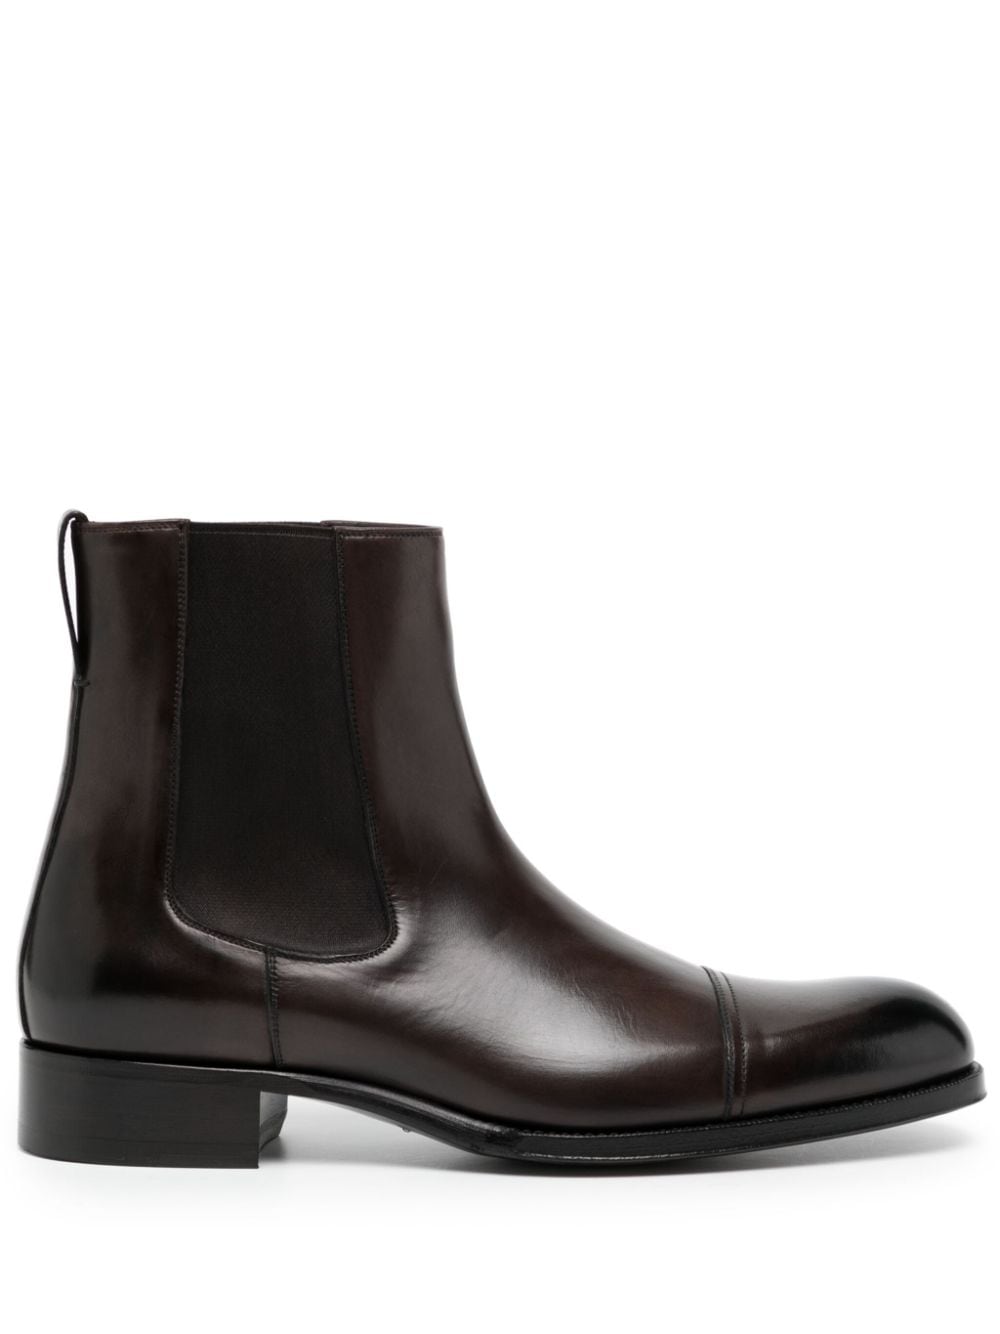 TOM FORD leather ChelseEdgar leather Chelsea bootsa boots - Brown von TOM FORD